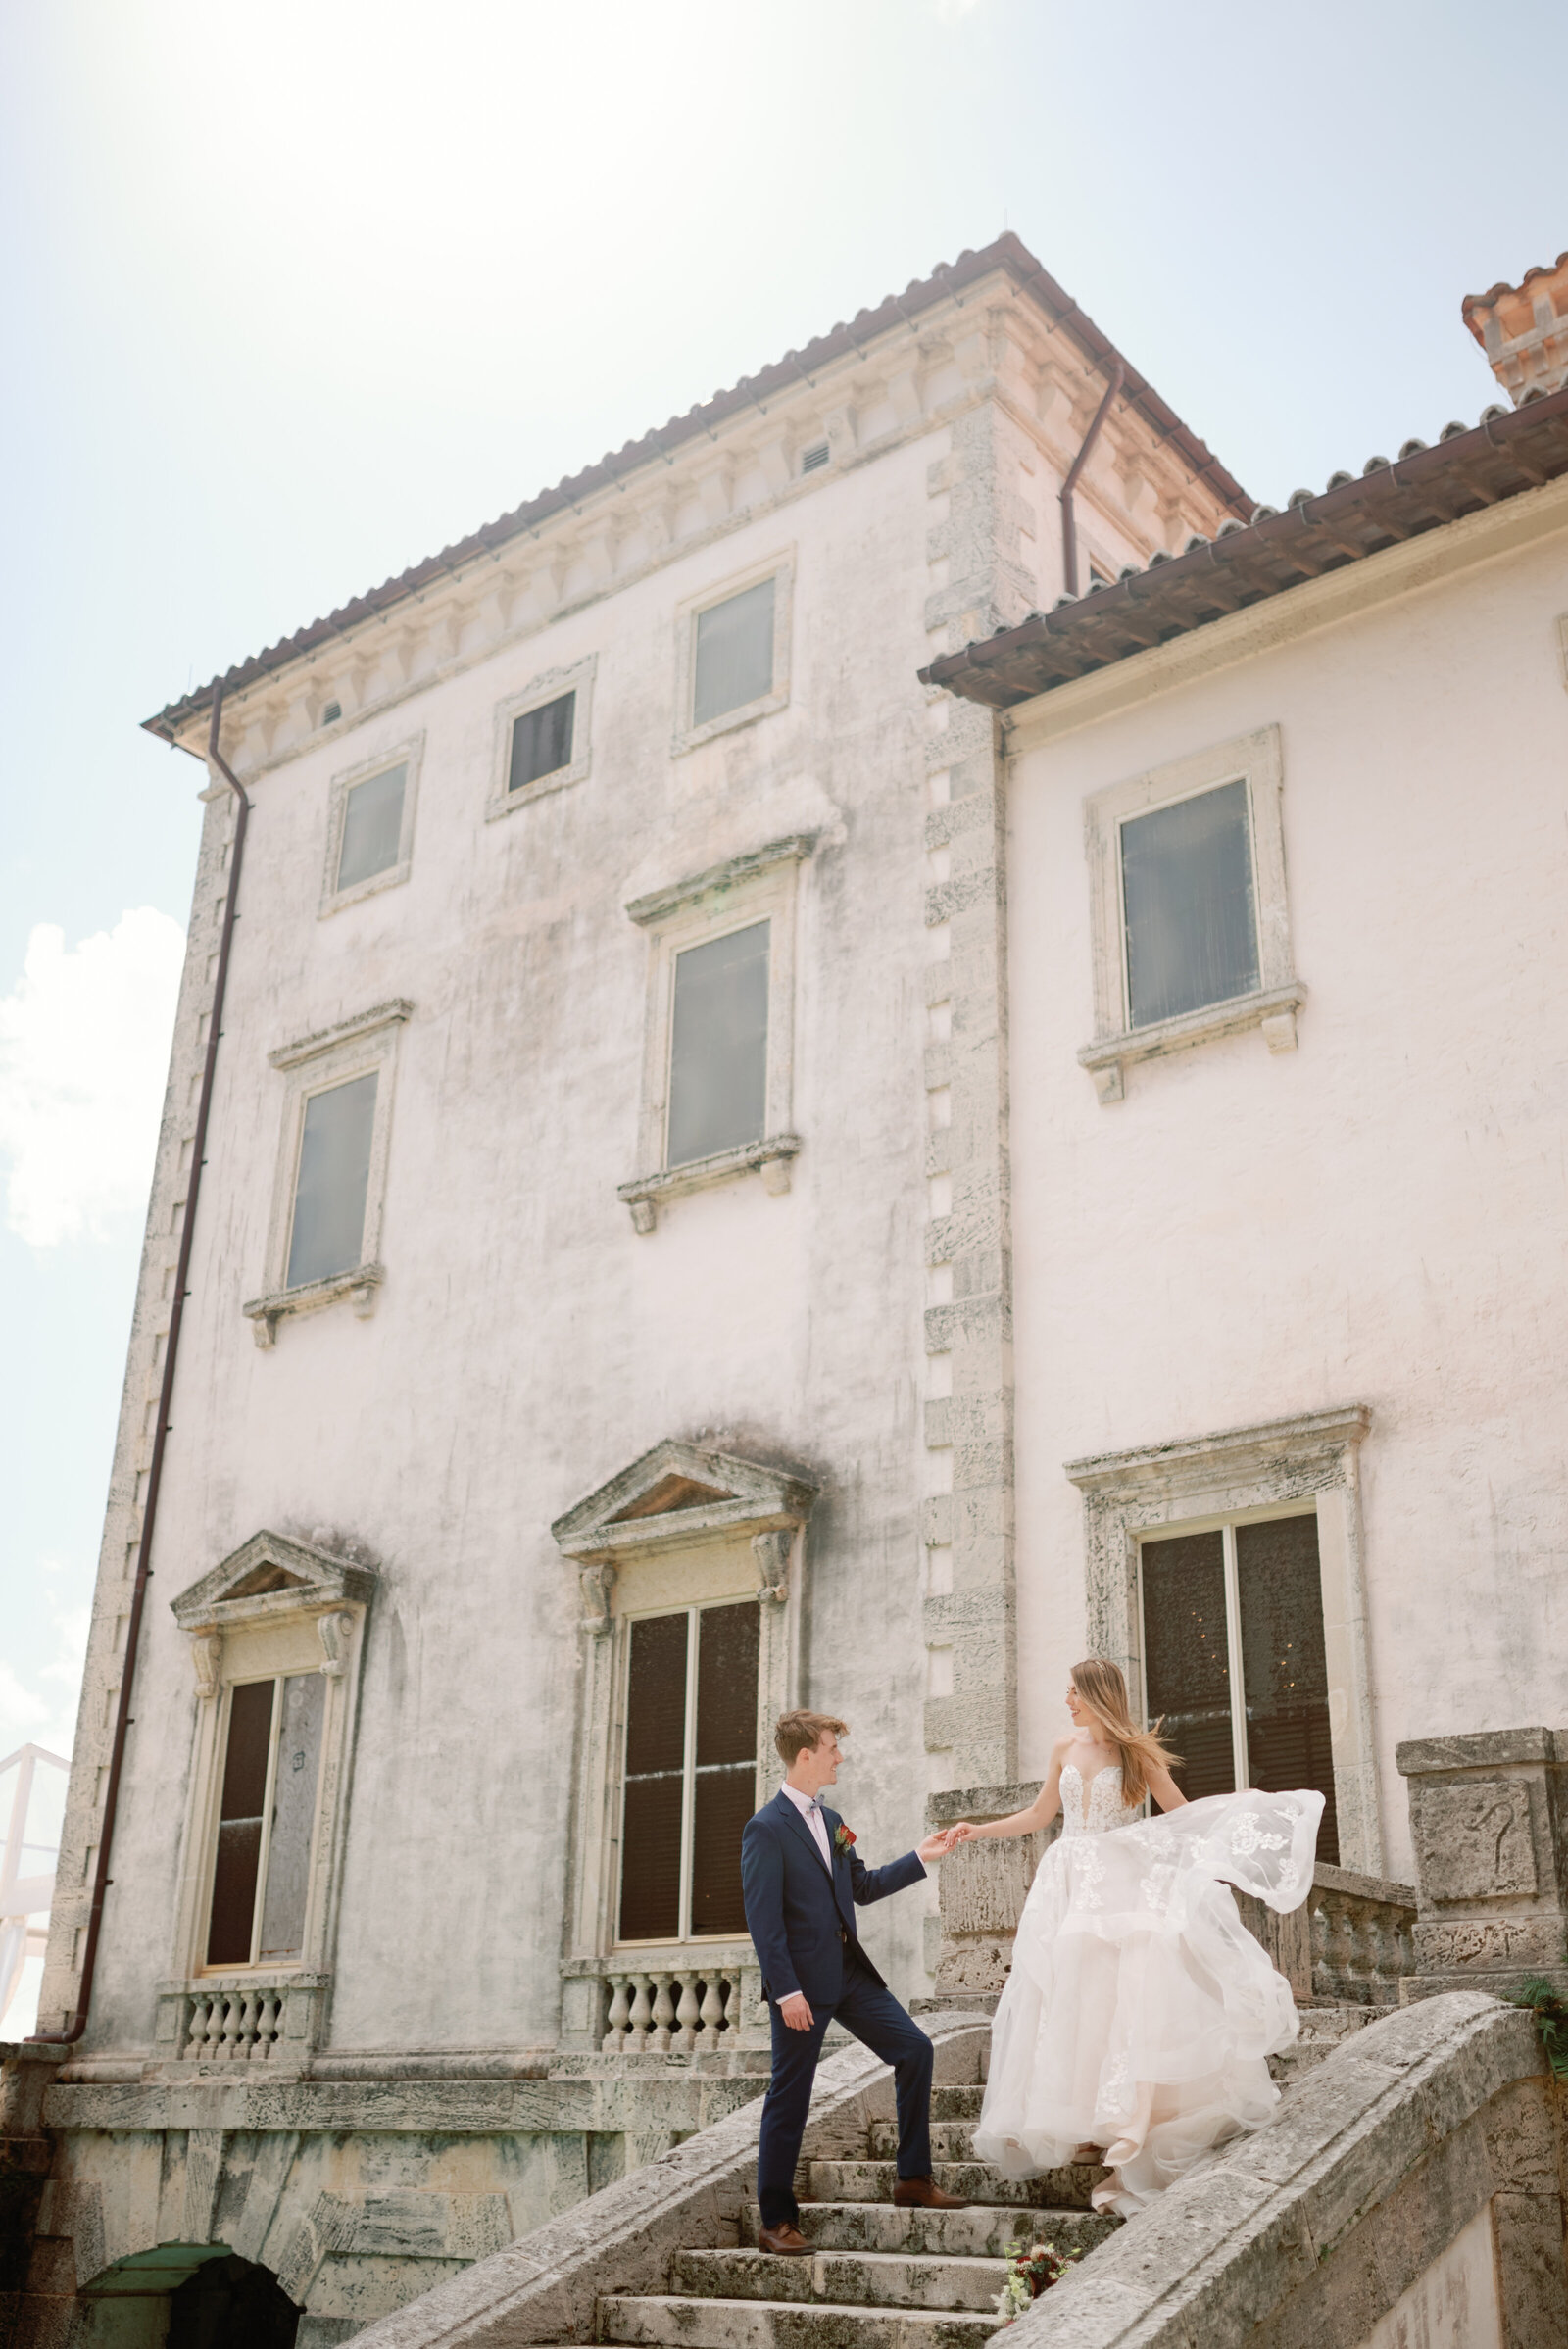 Groom leading bride down the steps at the historic Vizcaya Mansion